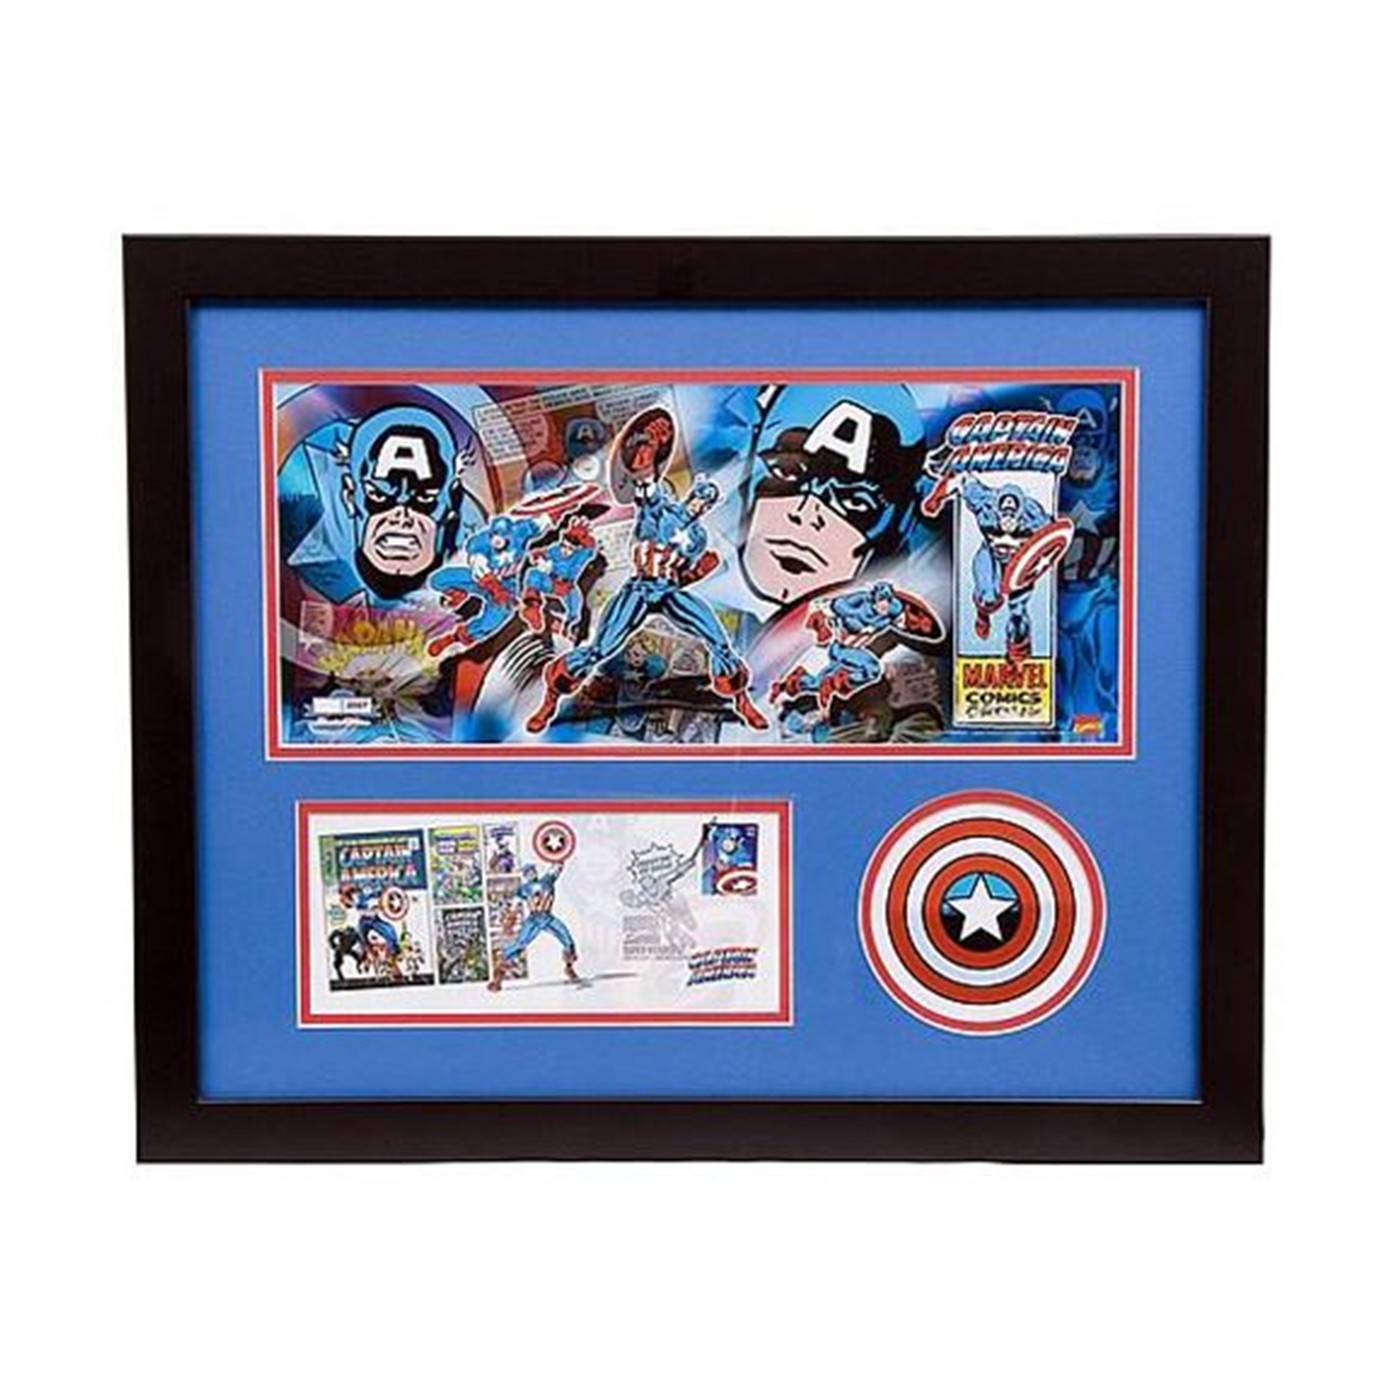 Captain America Limited Ed 18x22 Framed Lithograph